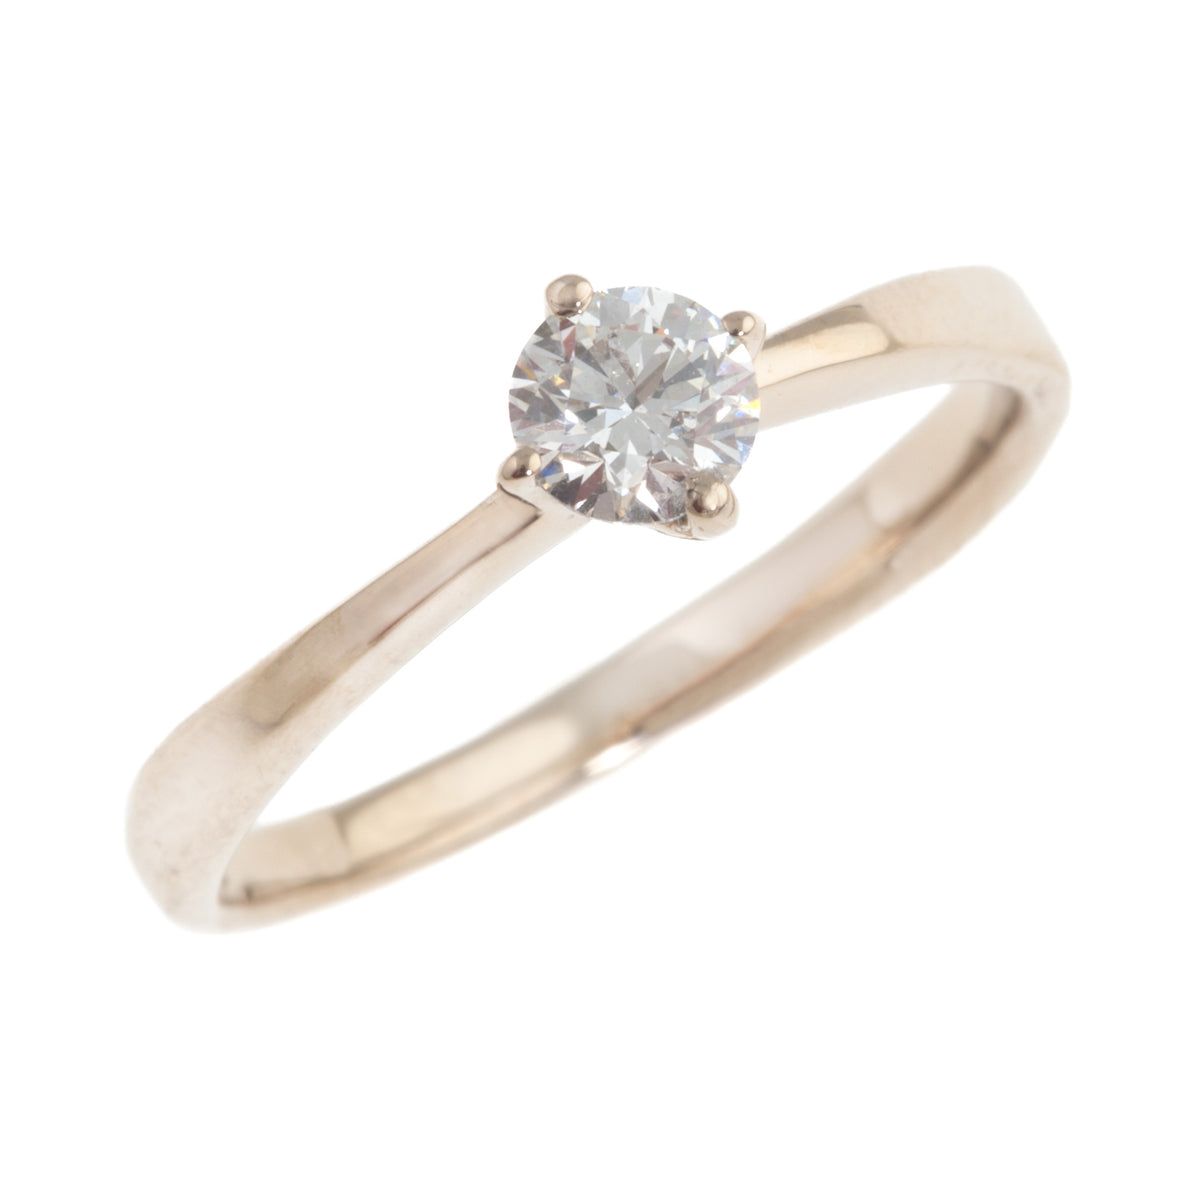 Queen Ring in 18ct Yellow or 18ct White Gold with Diamond